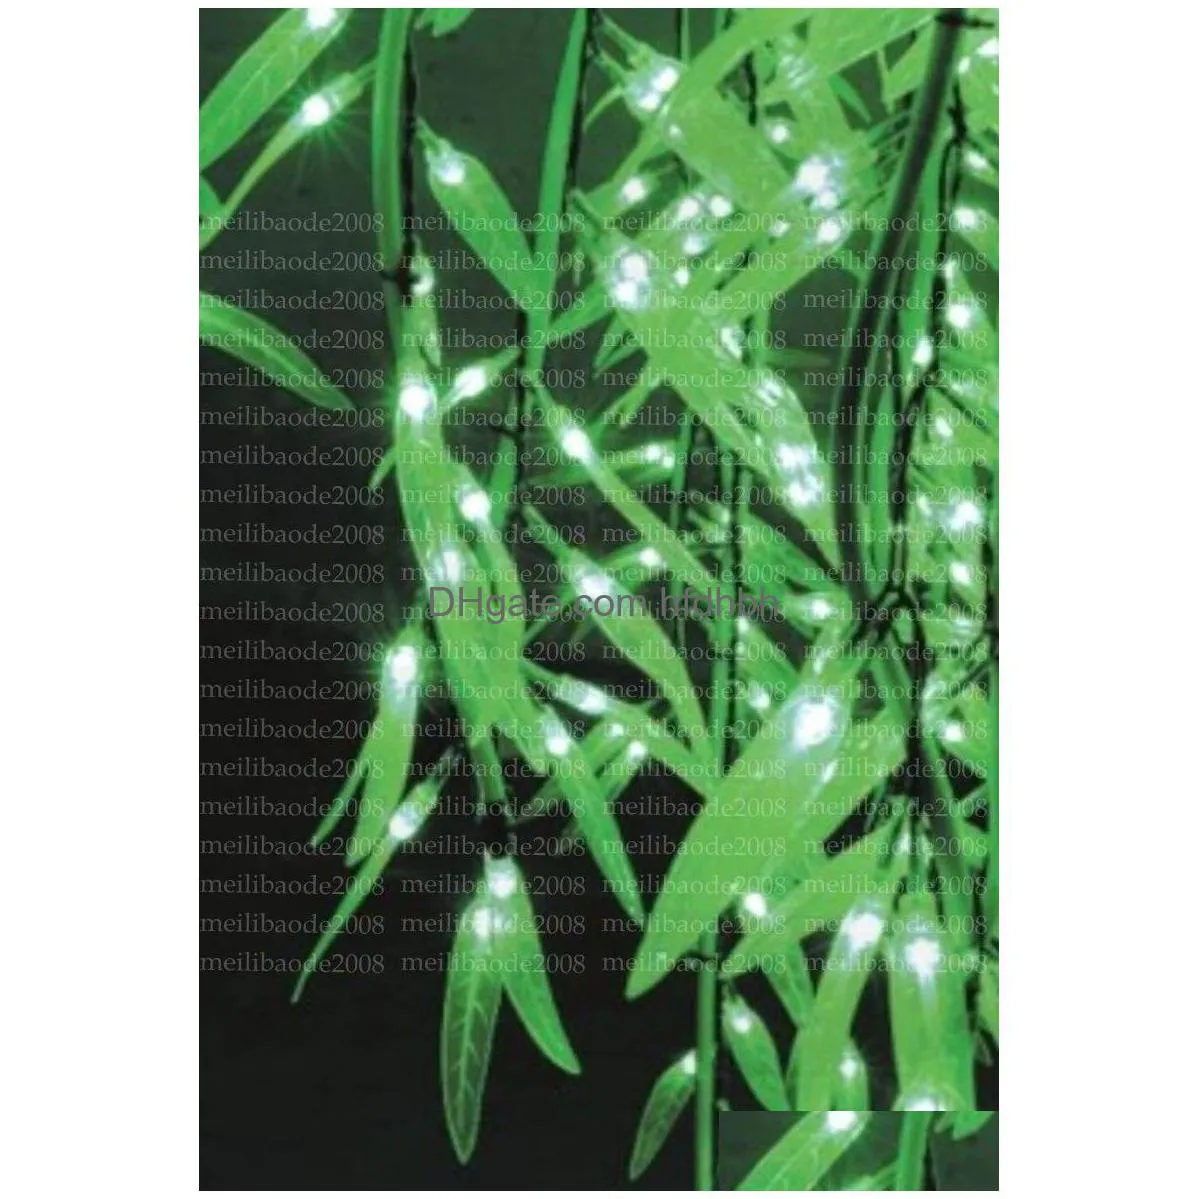 willow tree light 1152pcs led 2m/6.6ft / 960pcs led 1.8m rainproof christmas wedding party indoor or outdoor use ac 90-265v